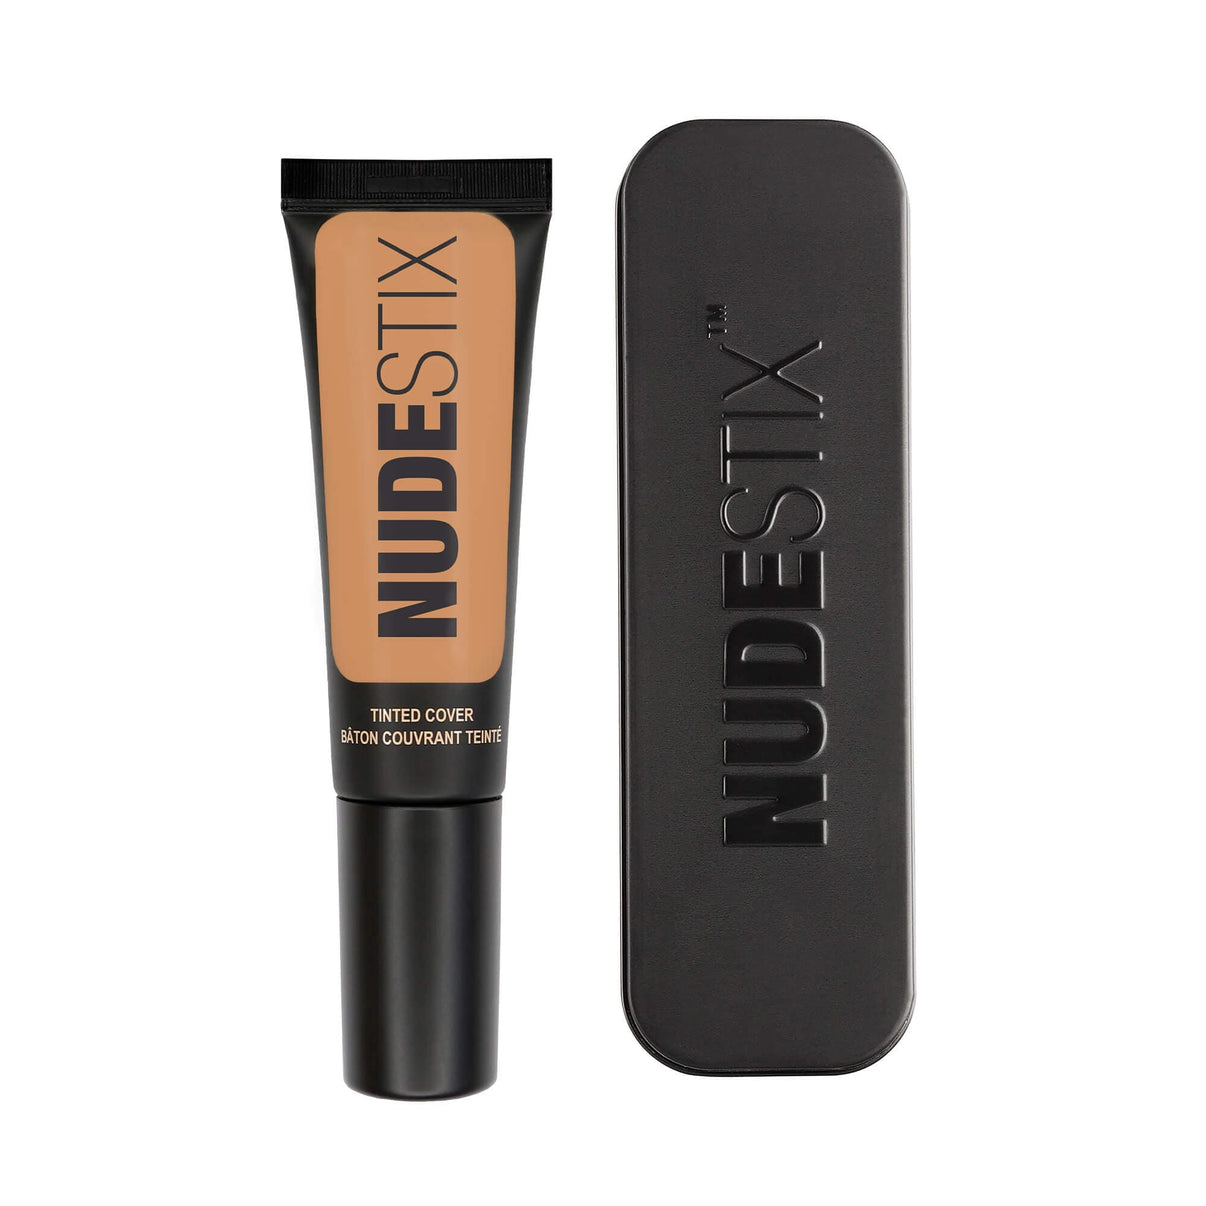 Tinted Cover Liquid Foundation in shade nude 7 with Nudestix can